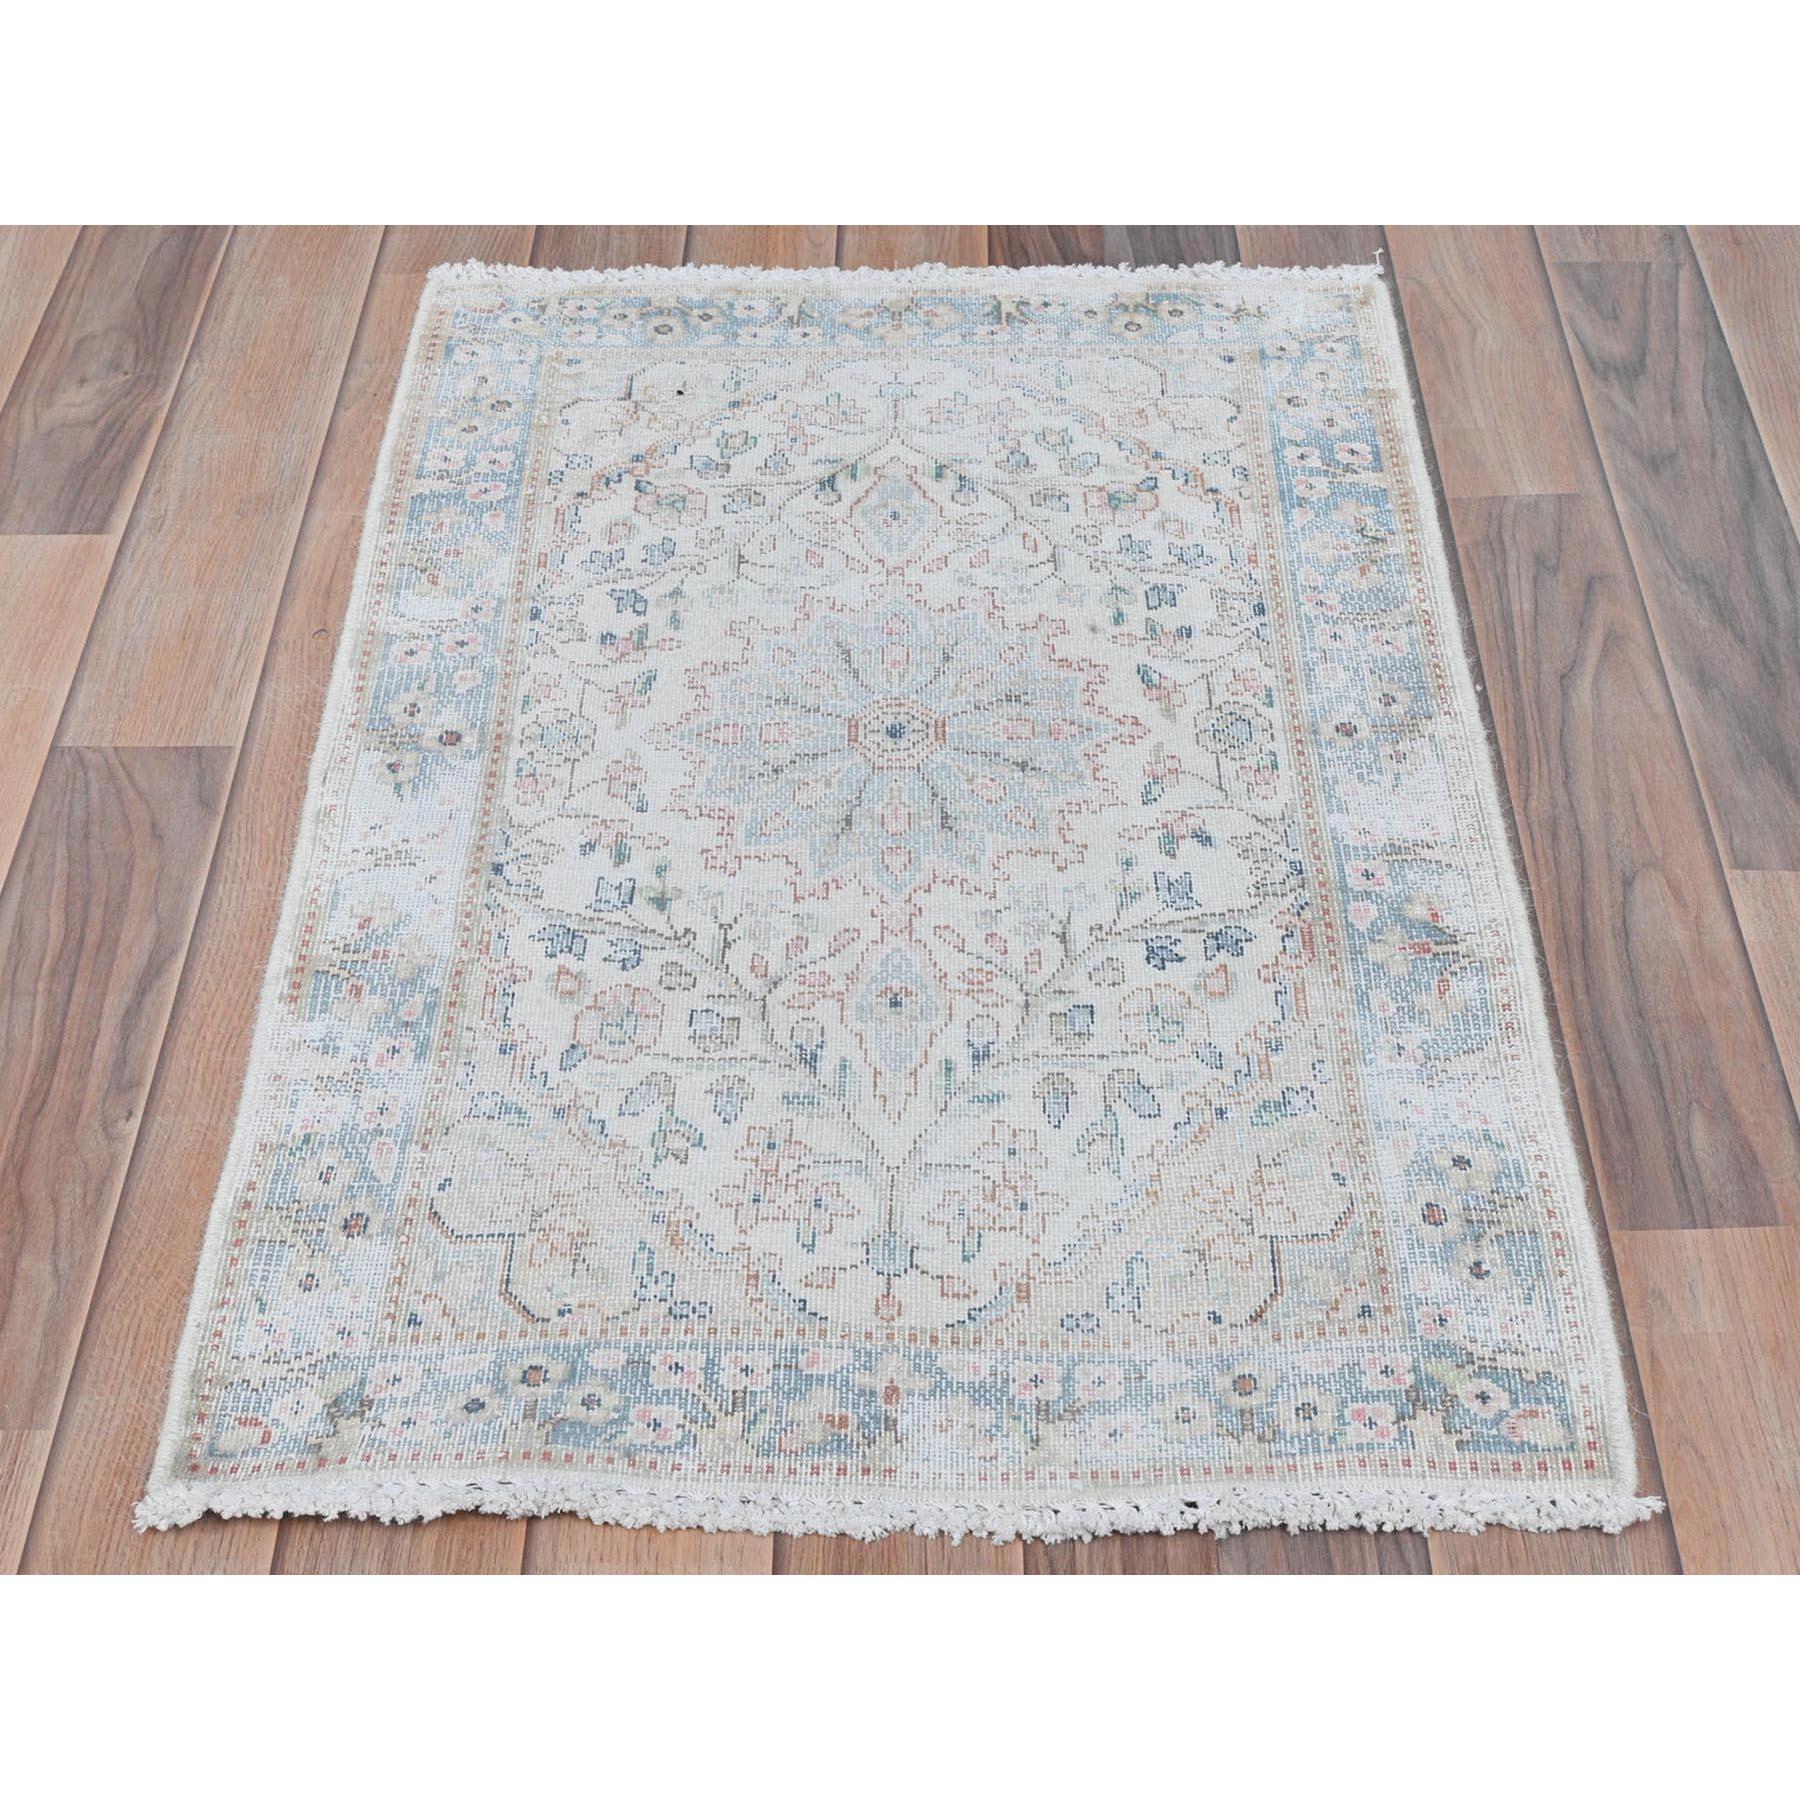 This fabulous Hand-Knotted carpet has been created and designed for extra strength and durability. This rug has been handcrafted for weeks in the traditional method that is used to make
Exact Rug Size in Feet and Inches : 2'0